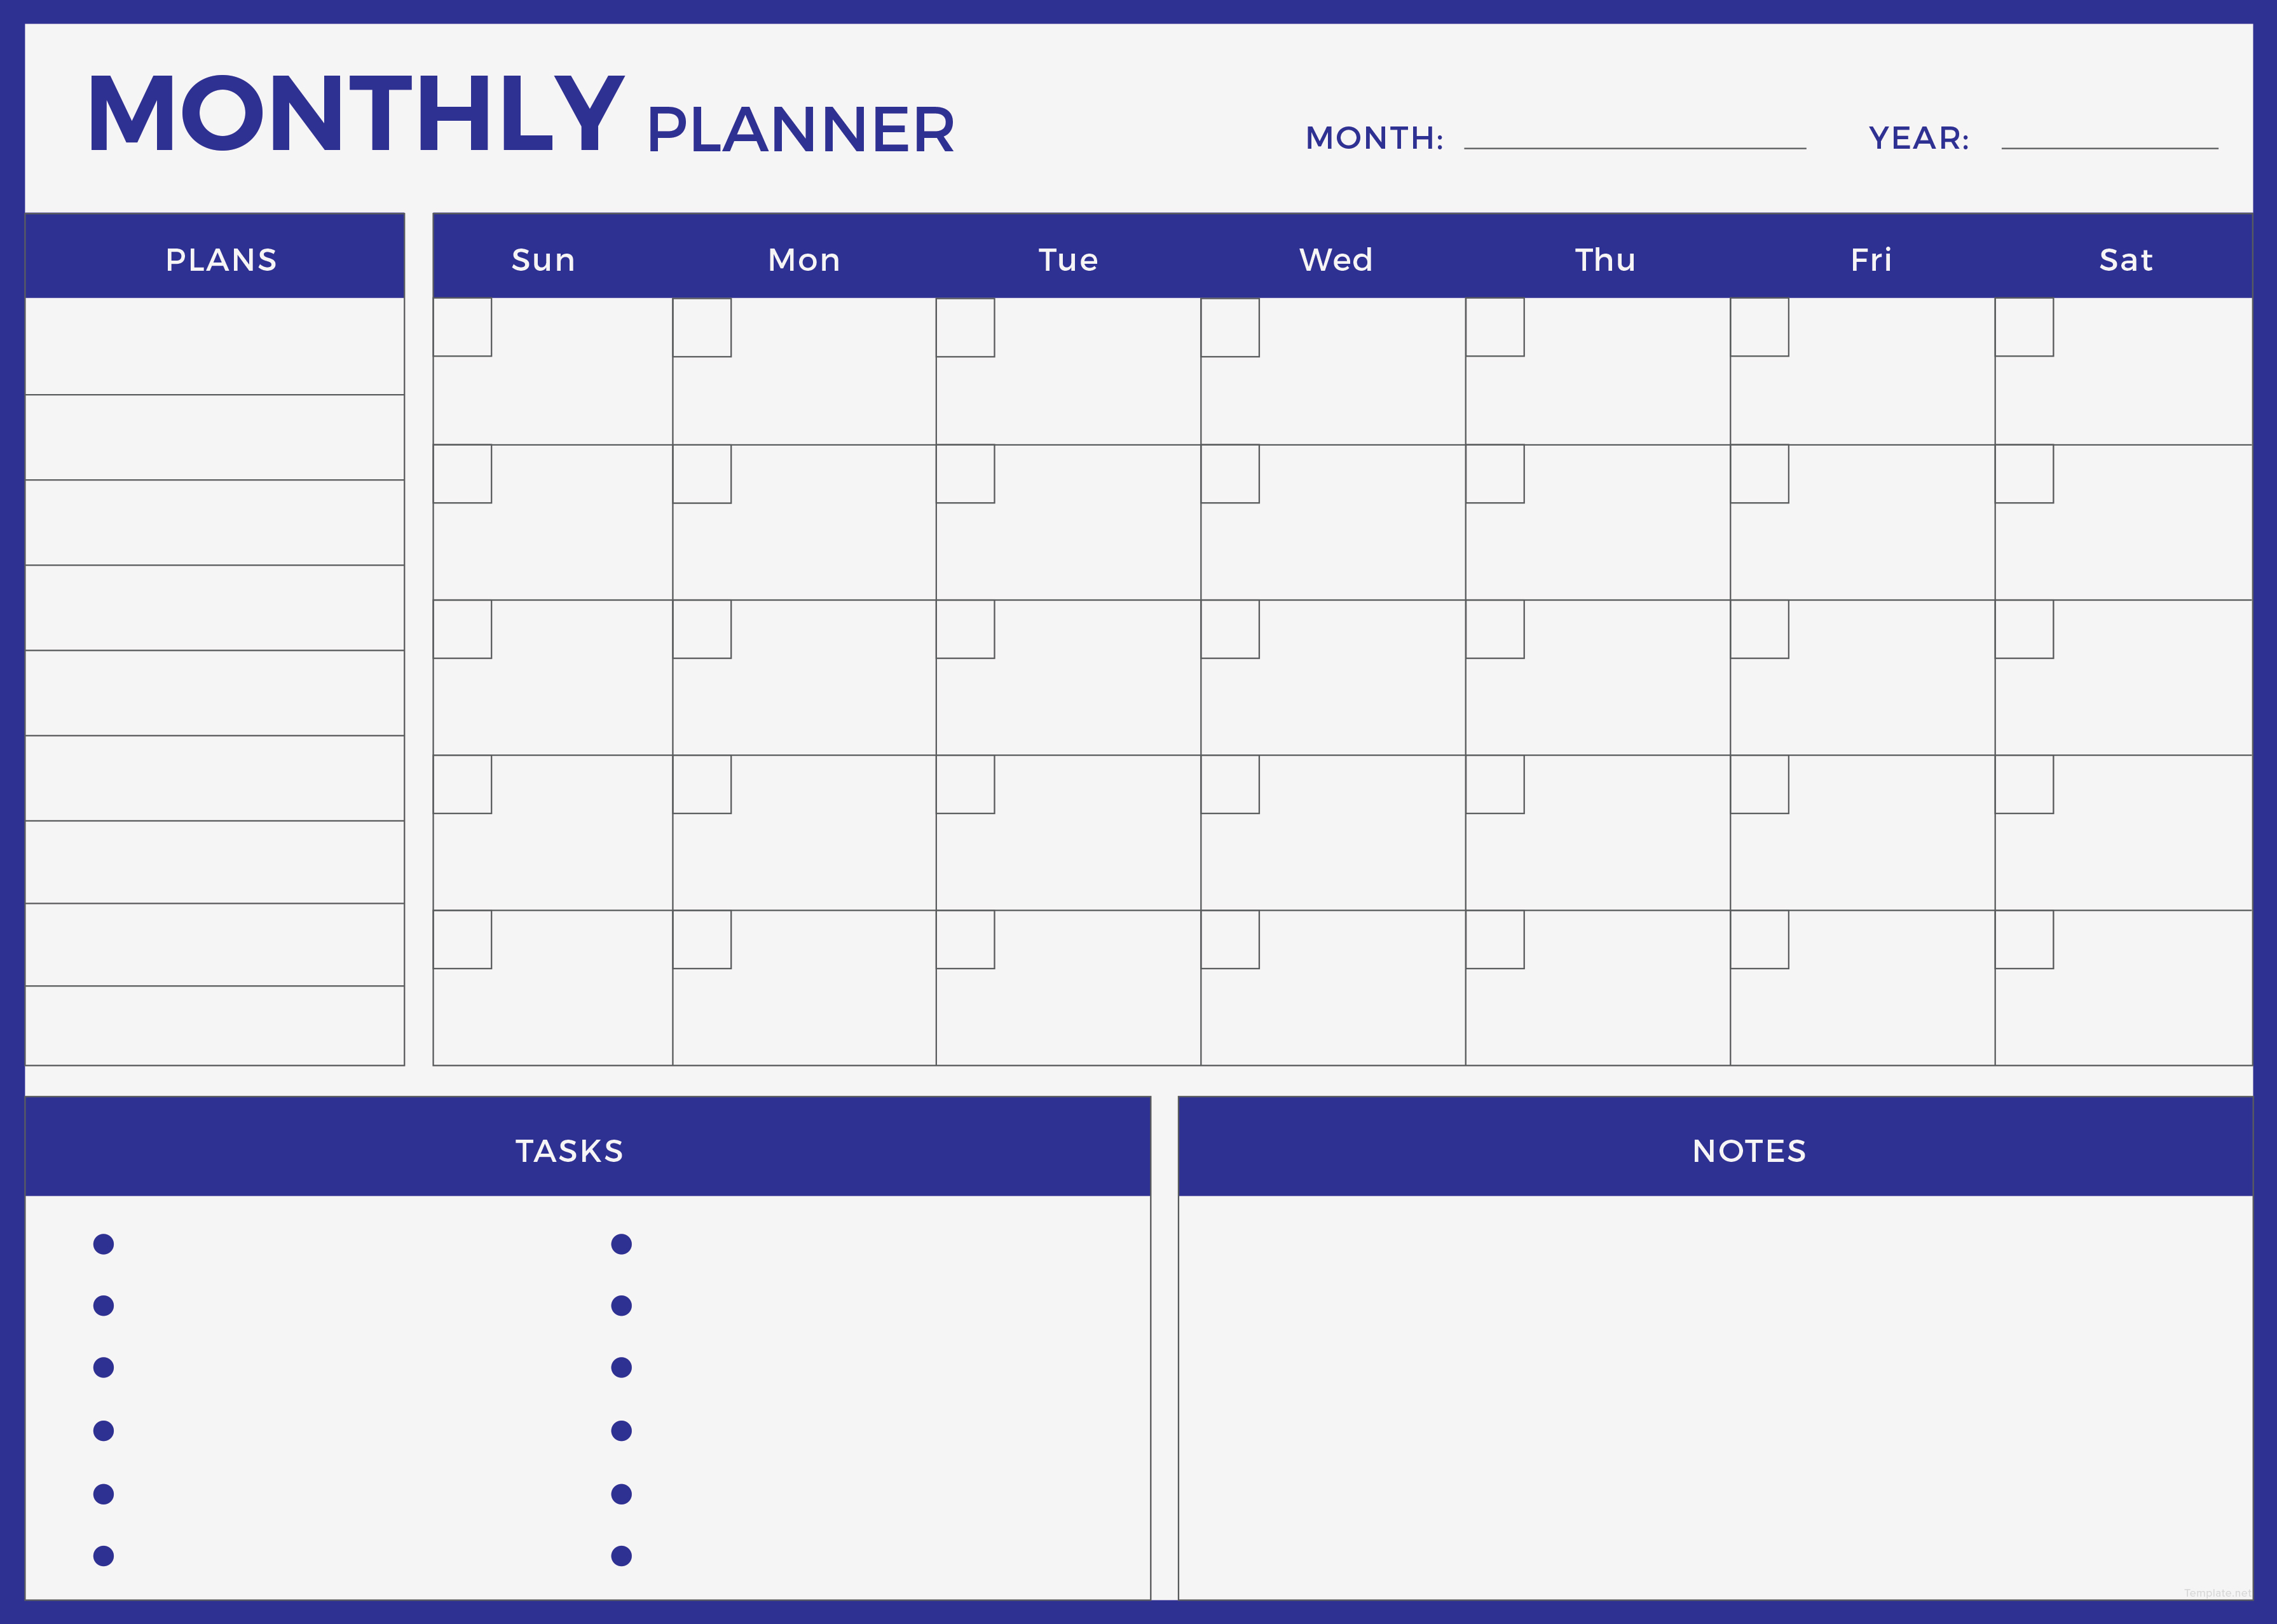 Free Monthly Planner Template In Adobe Photoshop Adobe Illustrator Adobe InDesign Template